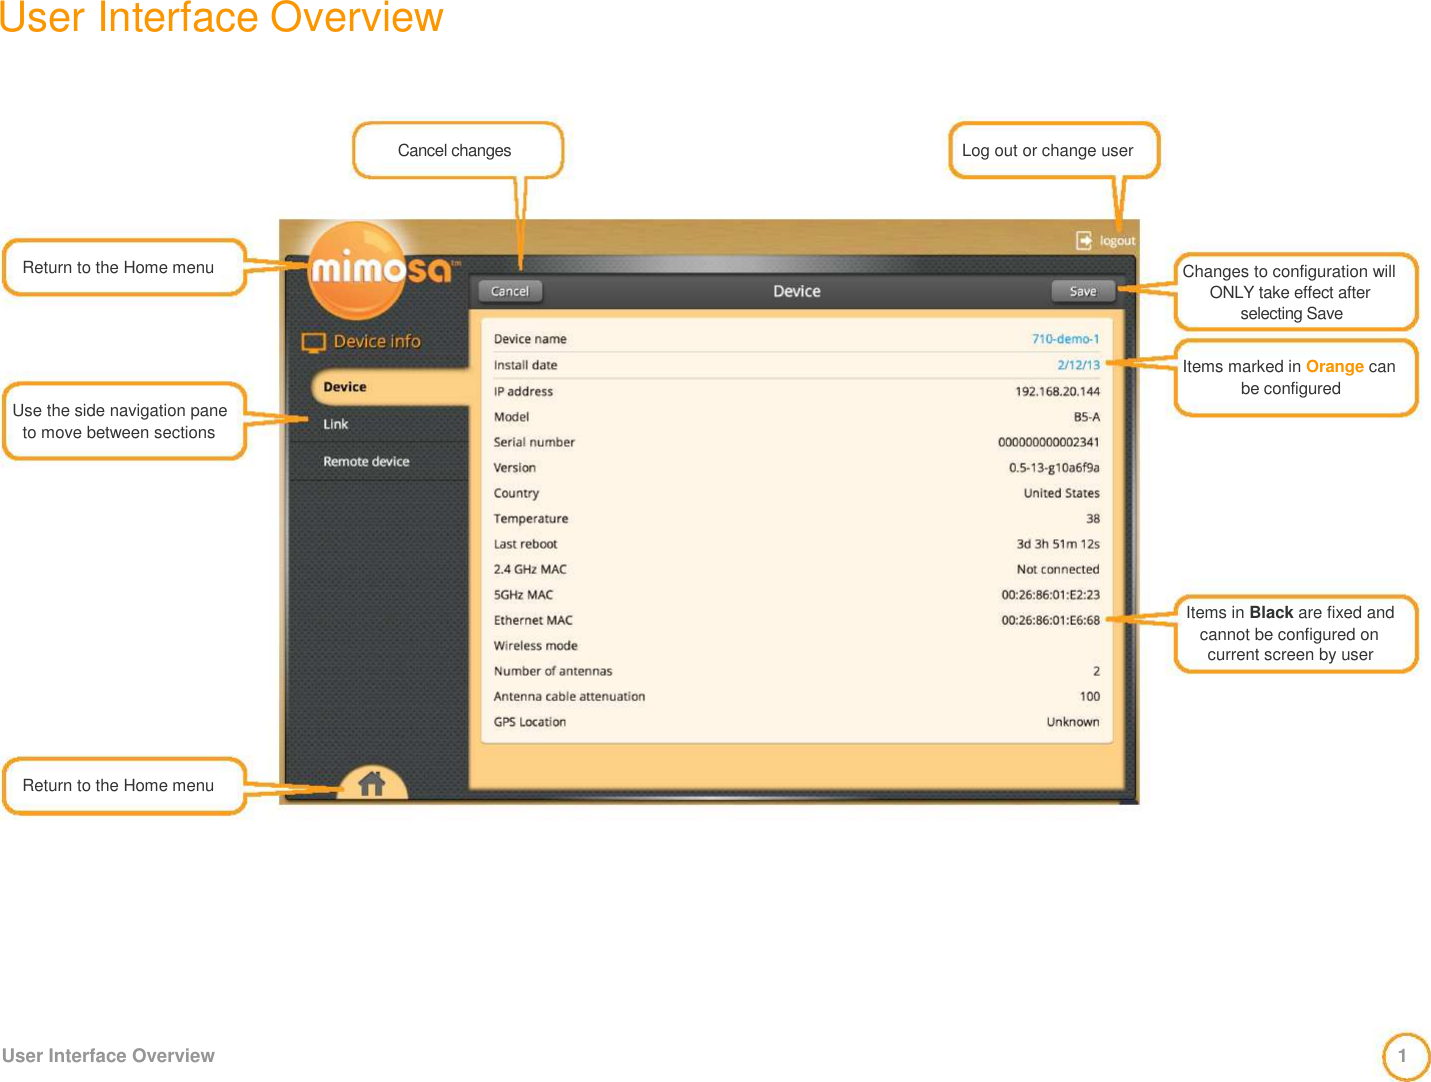 User Interface Overview       Cancel changes  Log out or change user      Return to the Home menu       Use the side navigation pane  to move between sections      Changes to configuration will  ONLY take effect after  selecting Save   Items marked in Orange can  be configured         Items in Black are fixed and  cannot be configured on  current screen by user        Return to the Home menu            User Interface Overview  1 